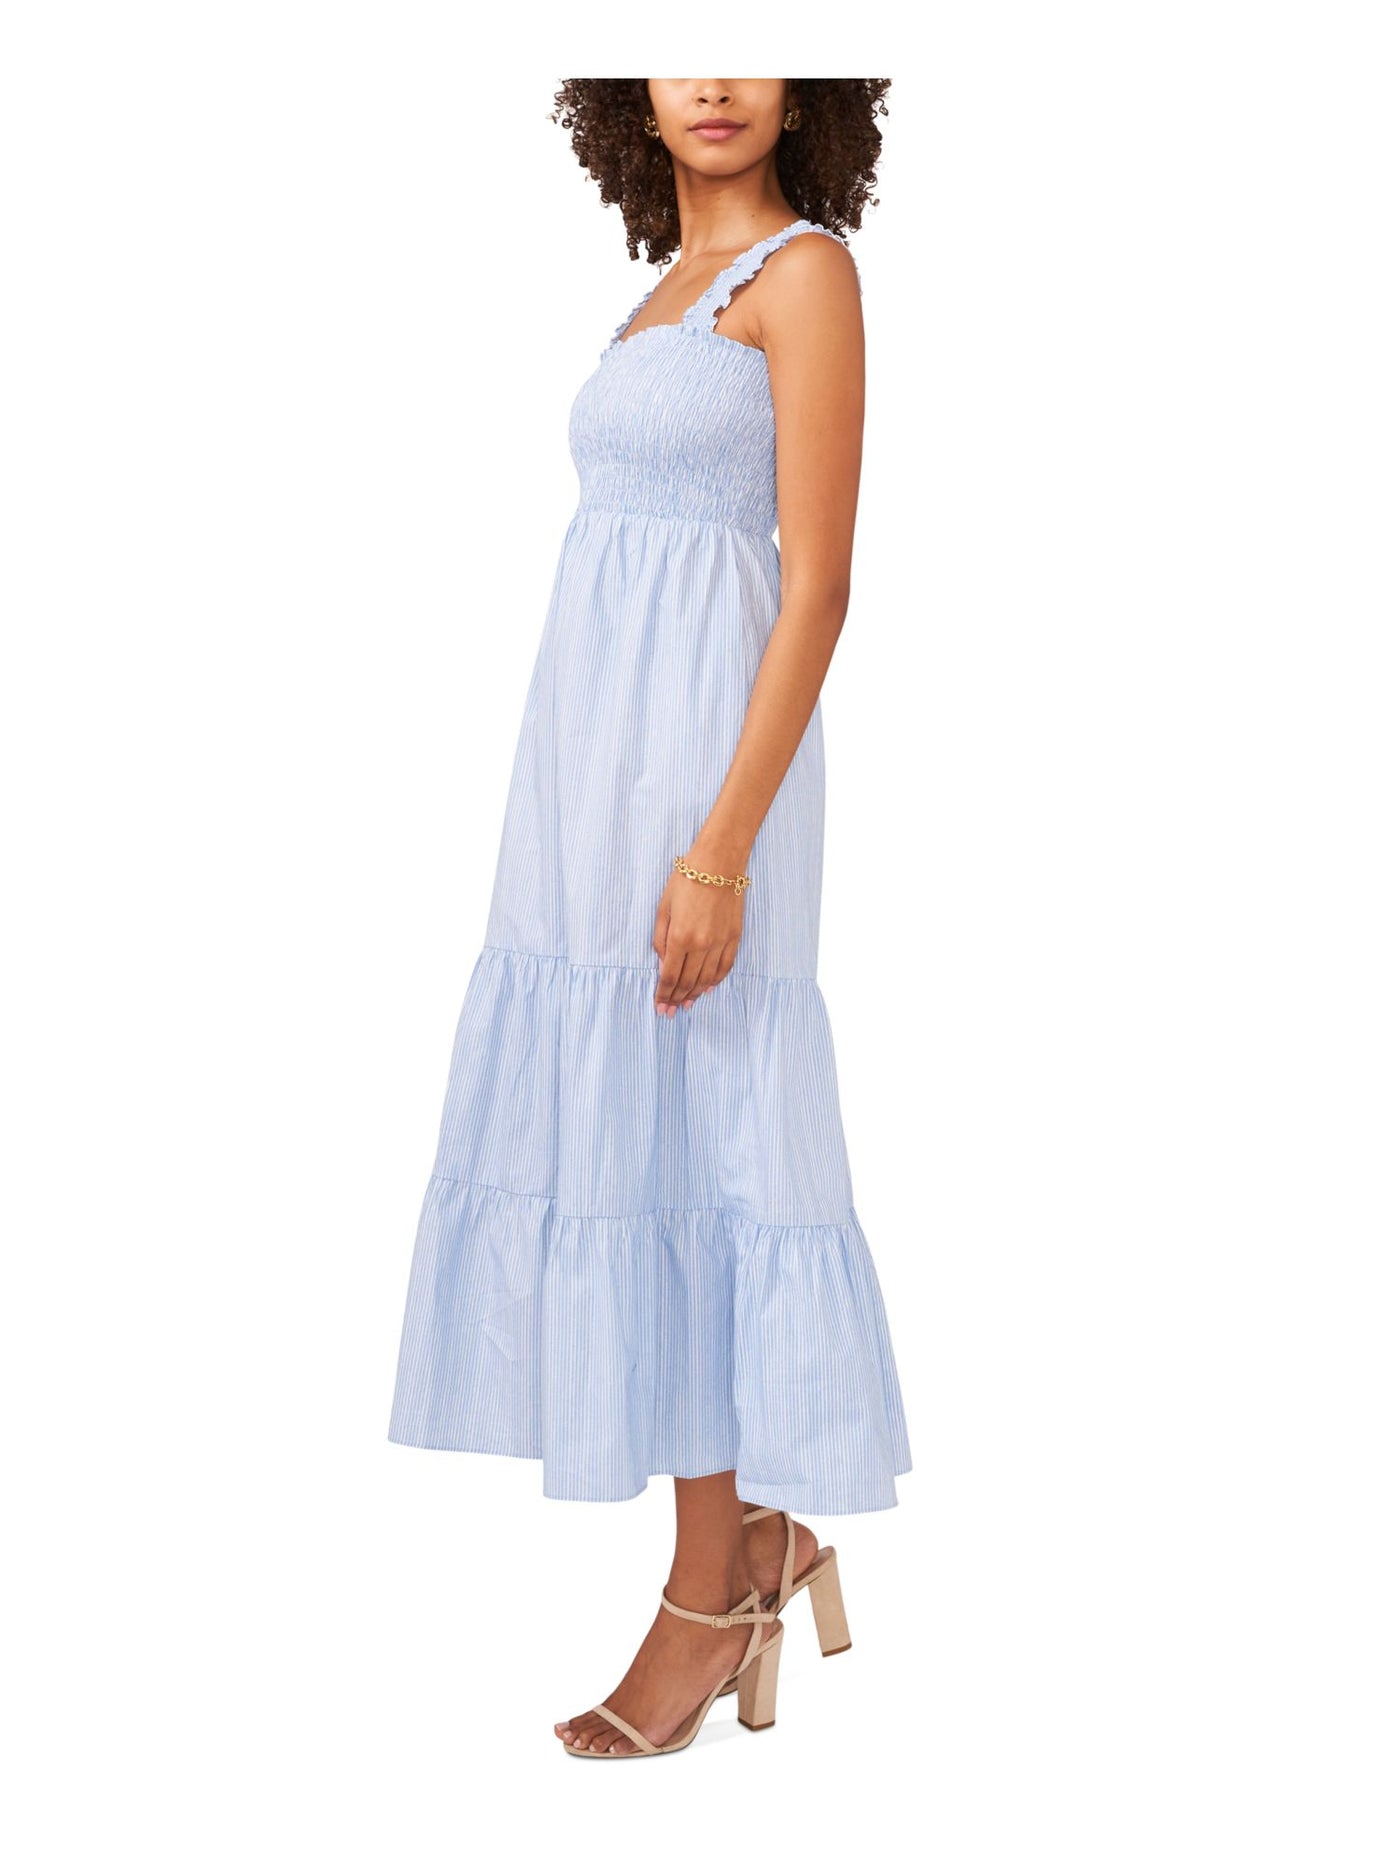 CECE Womens Blue Smocked Tiered Striped Sleeveless Square Neck Midi Fit + Flare Dress XS